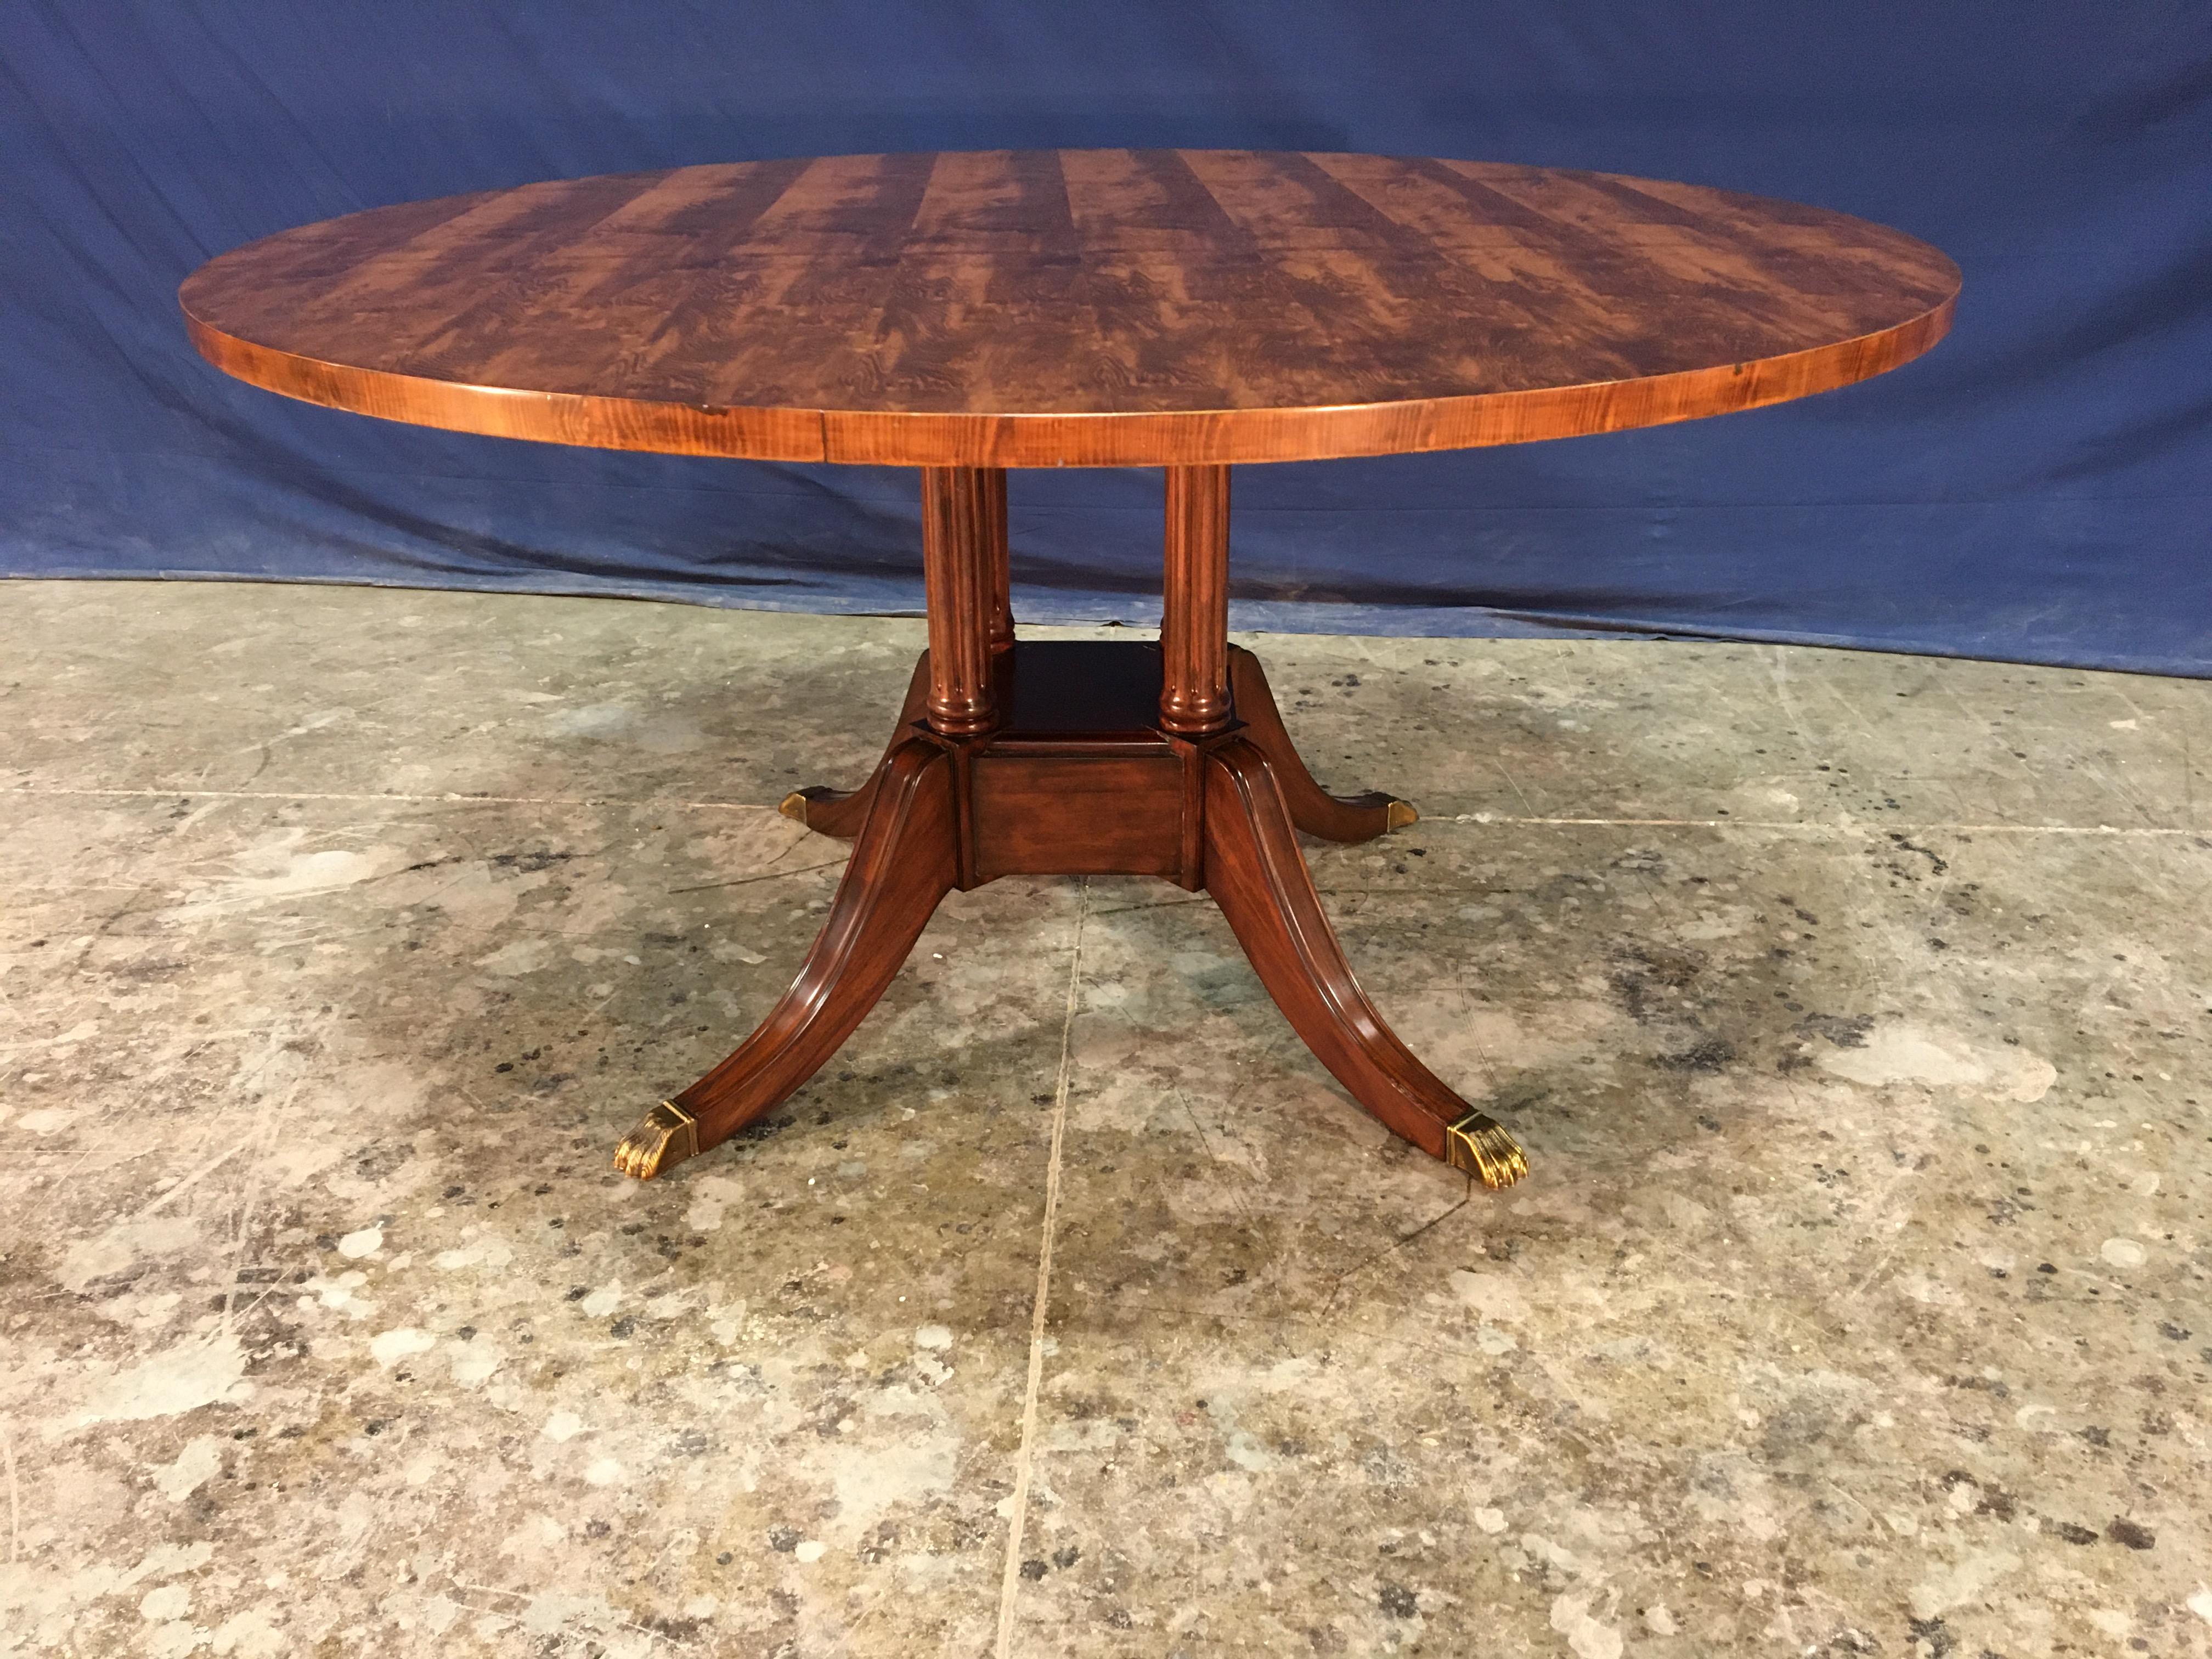 This is made-to-order round traditional Yew Wood top dining table made in the Leighton Hall shop. It features a field of slip-matched Yew Wood. The top has a hand rubbed and polished semigloss finish. The large birdcage pedestal has fluted legs